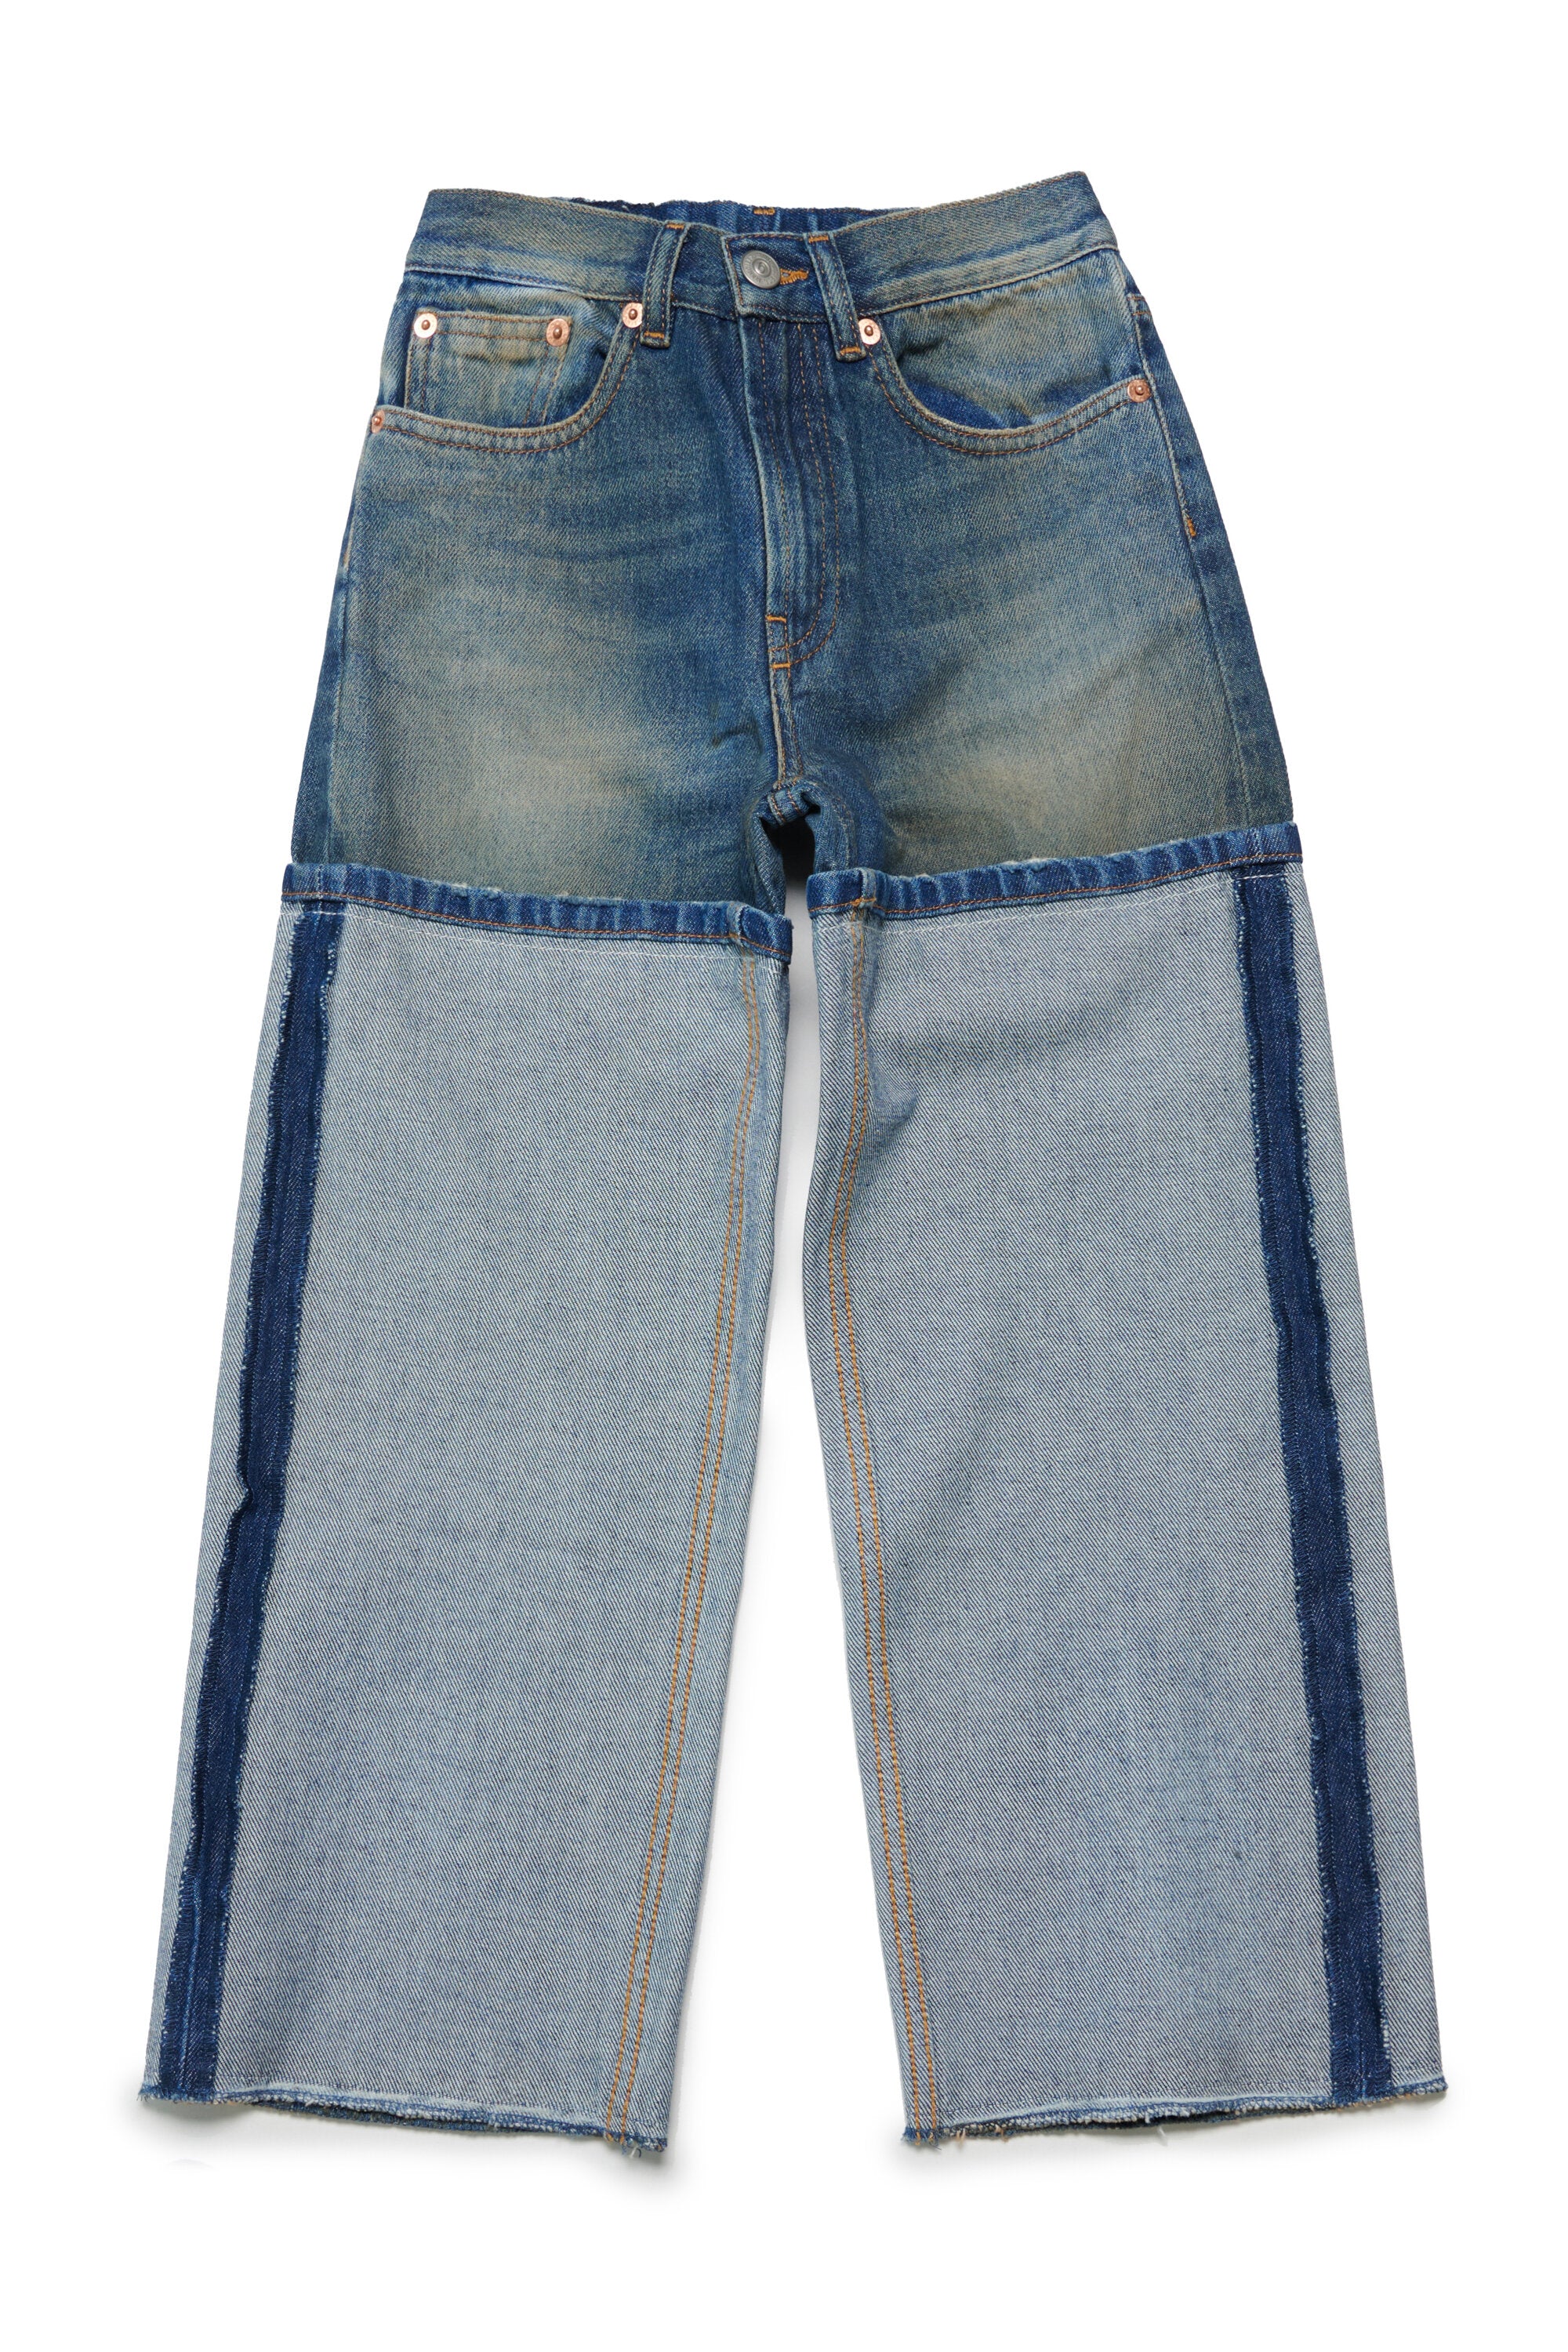 Re-cut shaded jeans